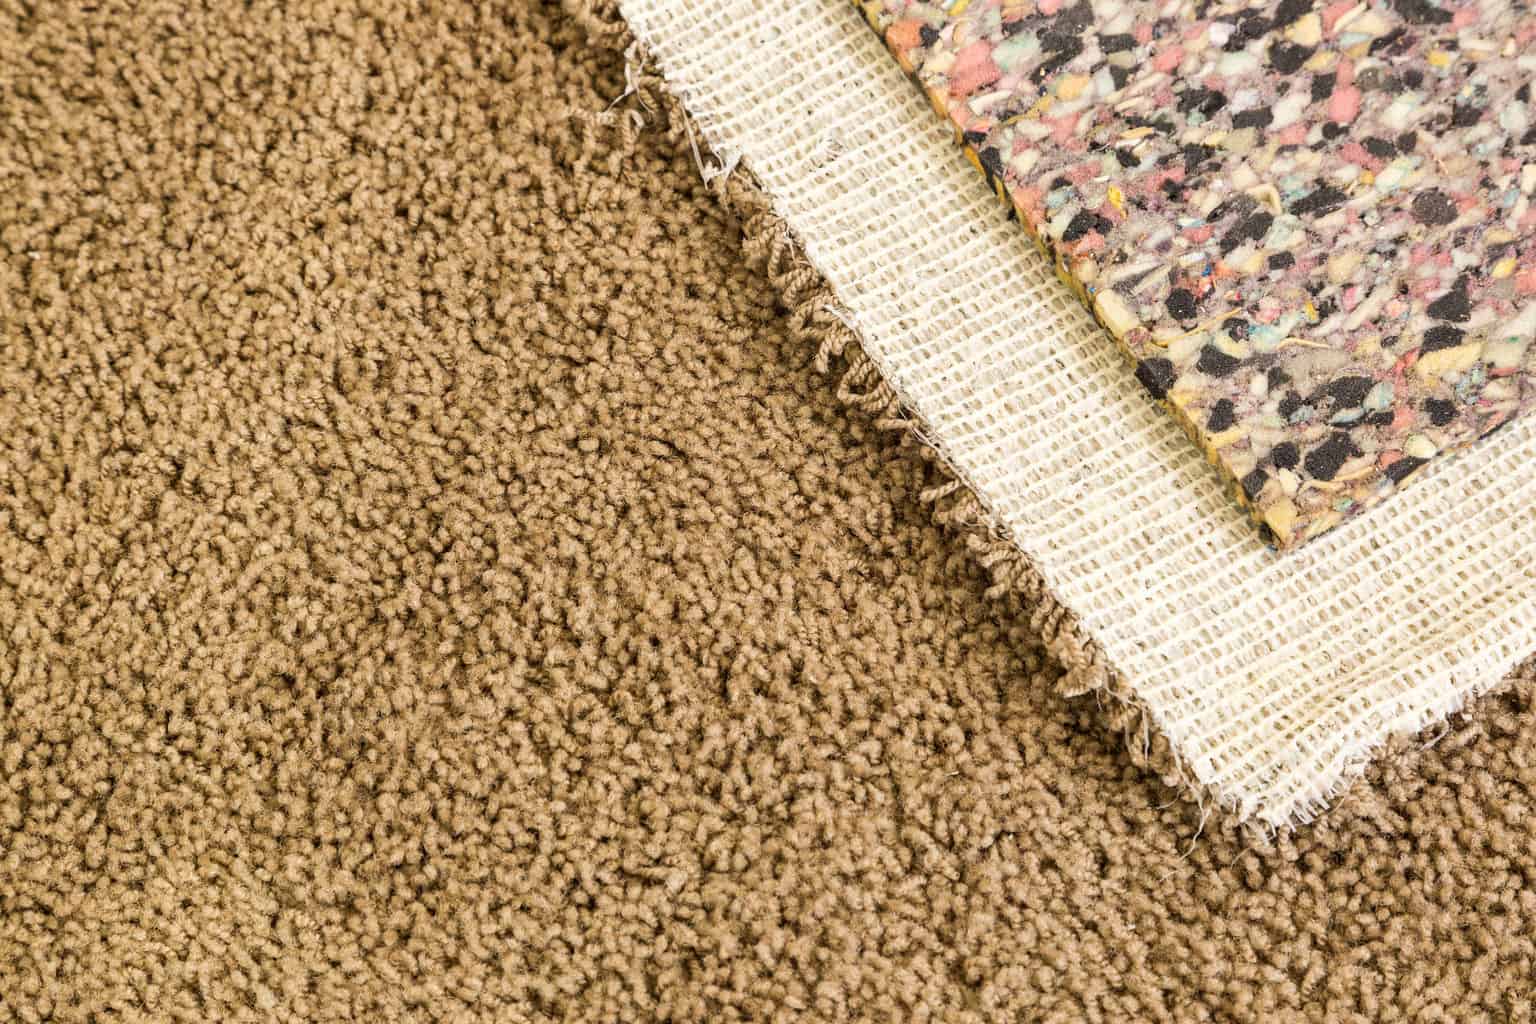 What You Need To Know About Carpet Padding [Types of Carpet Padding]